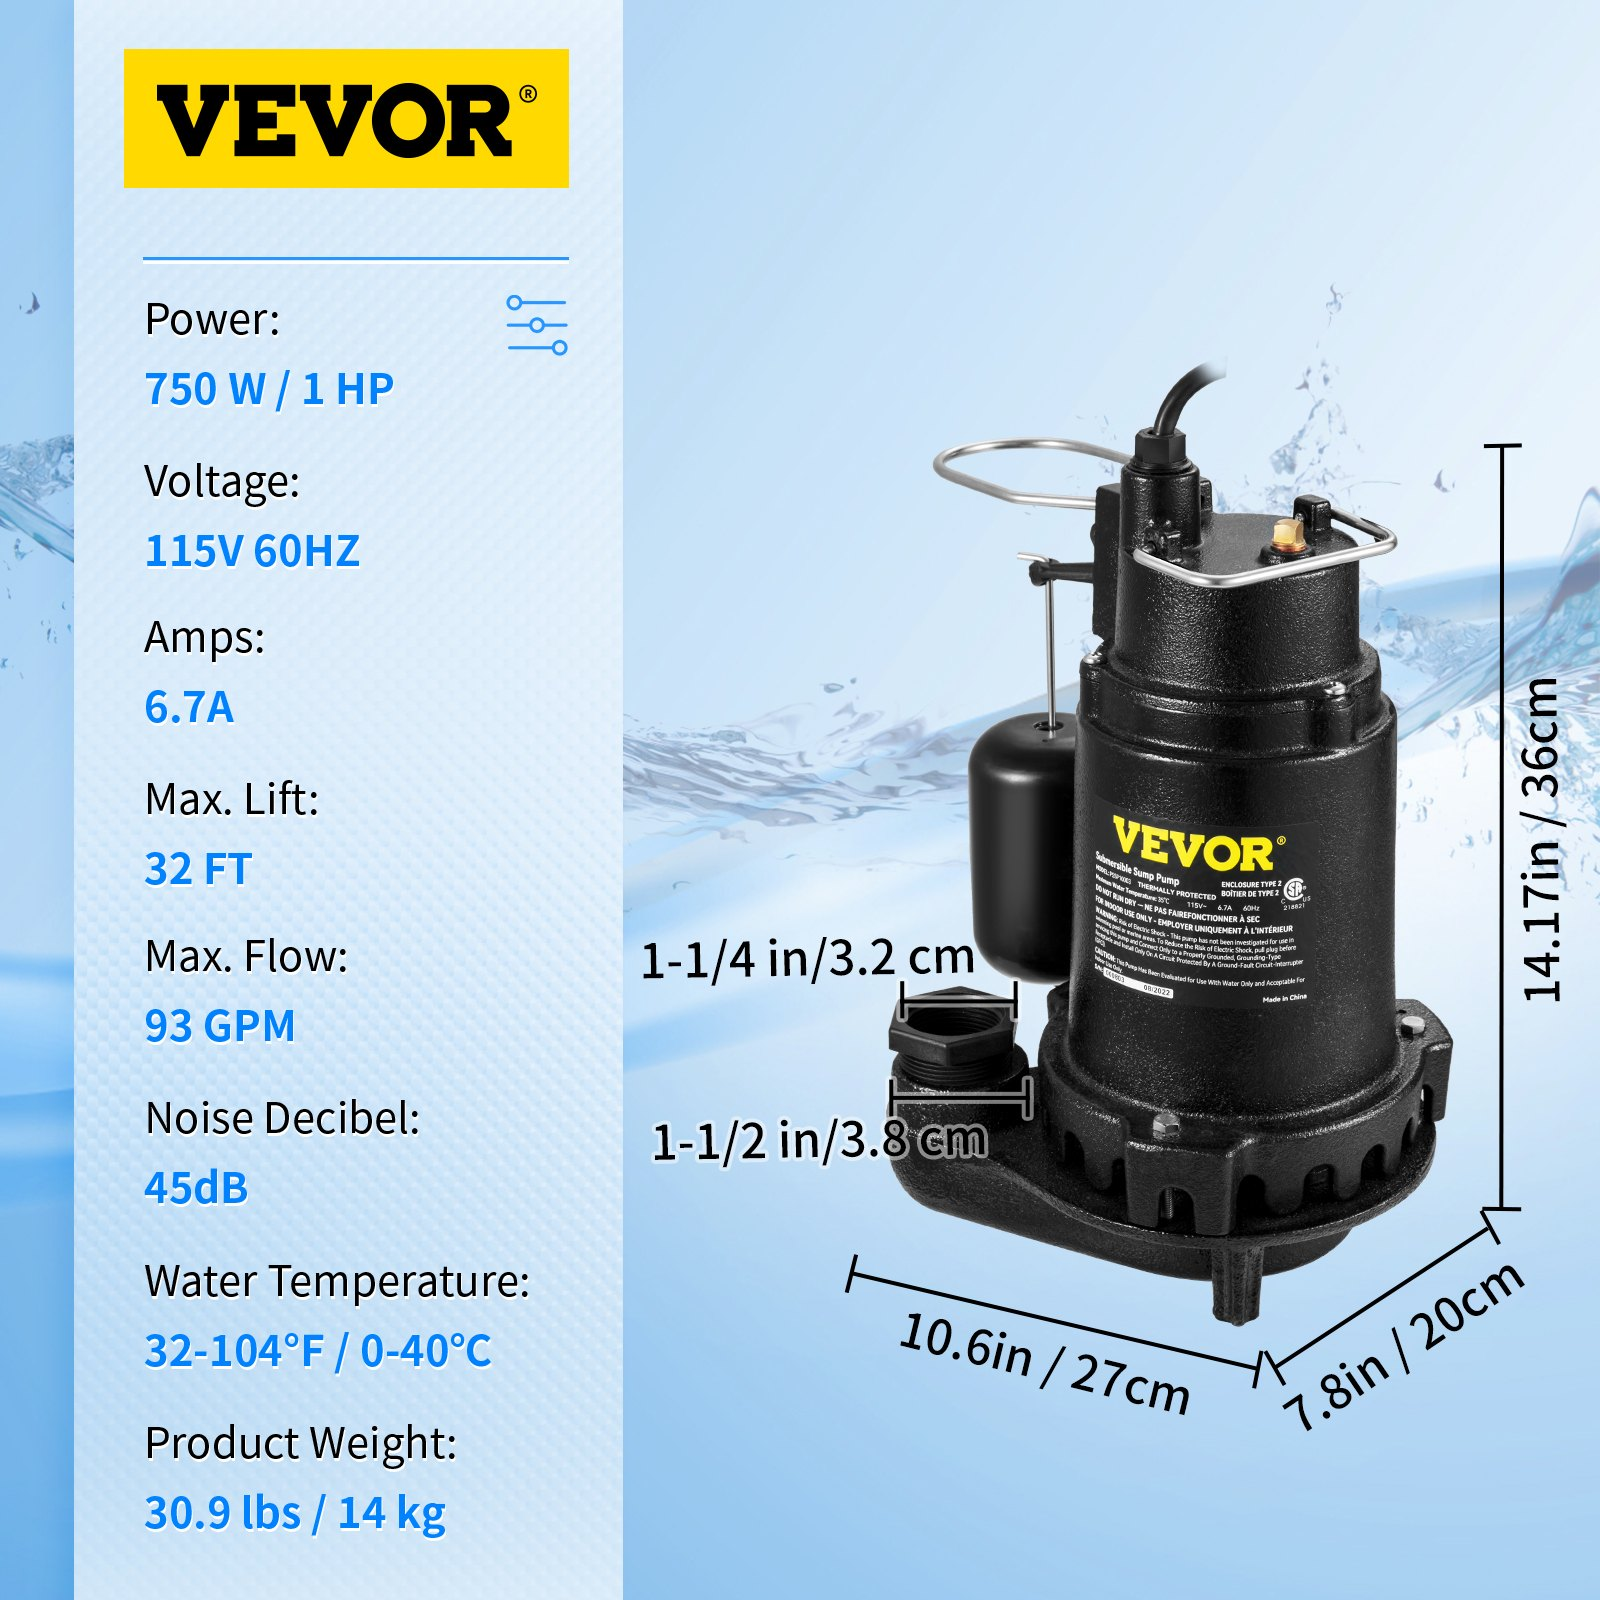 VEVOR 1HP Sewage Pump, 5600 GPH Cast Iron Submersible Sump Pump with Automatic Snap-action Float Switch, Heavy-Duty Submersible Sewage, Effluent Pump for Septic Tank, Basement, Flooding Area, Goodies N Stuff